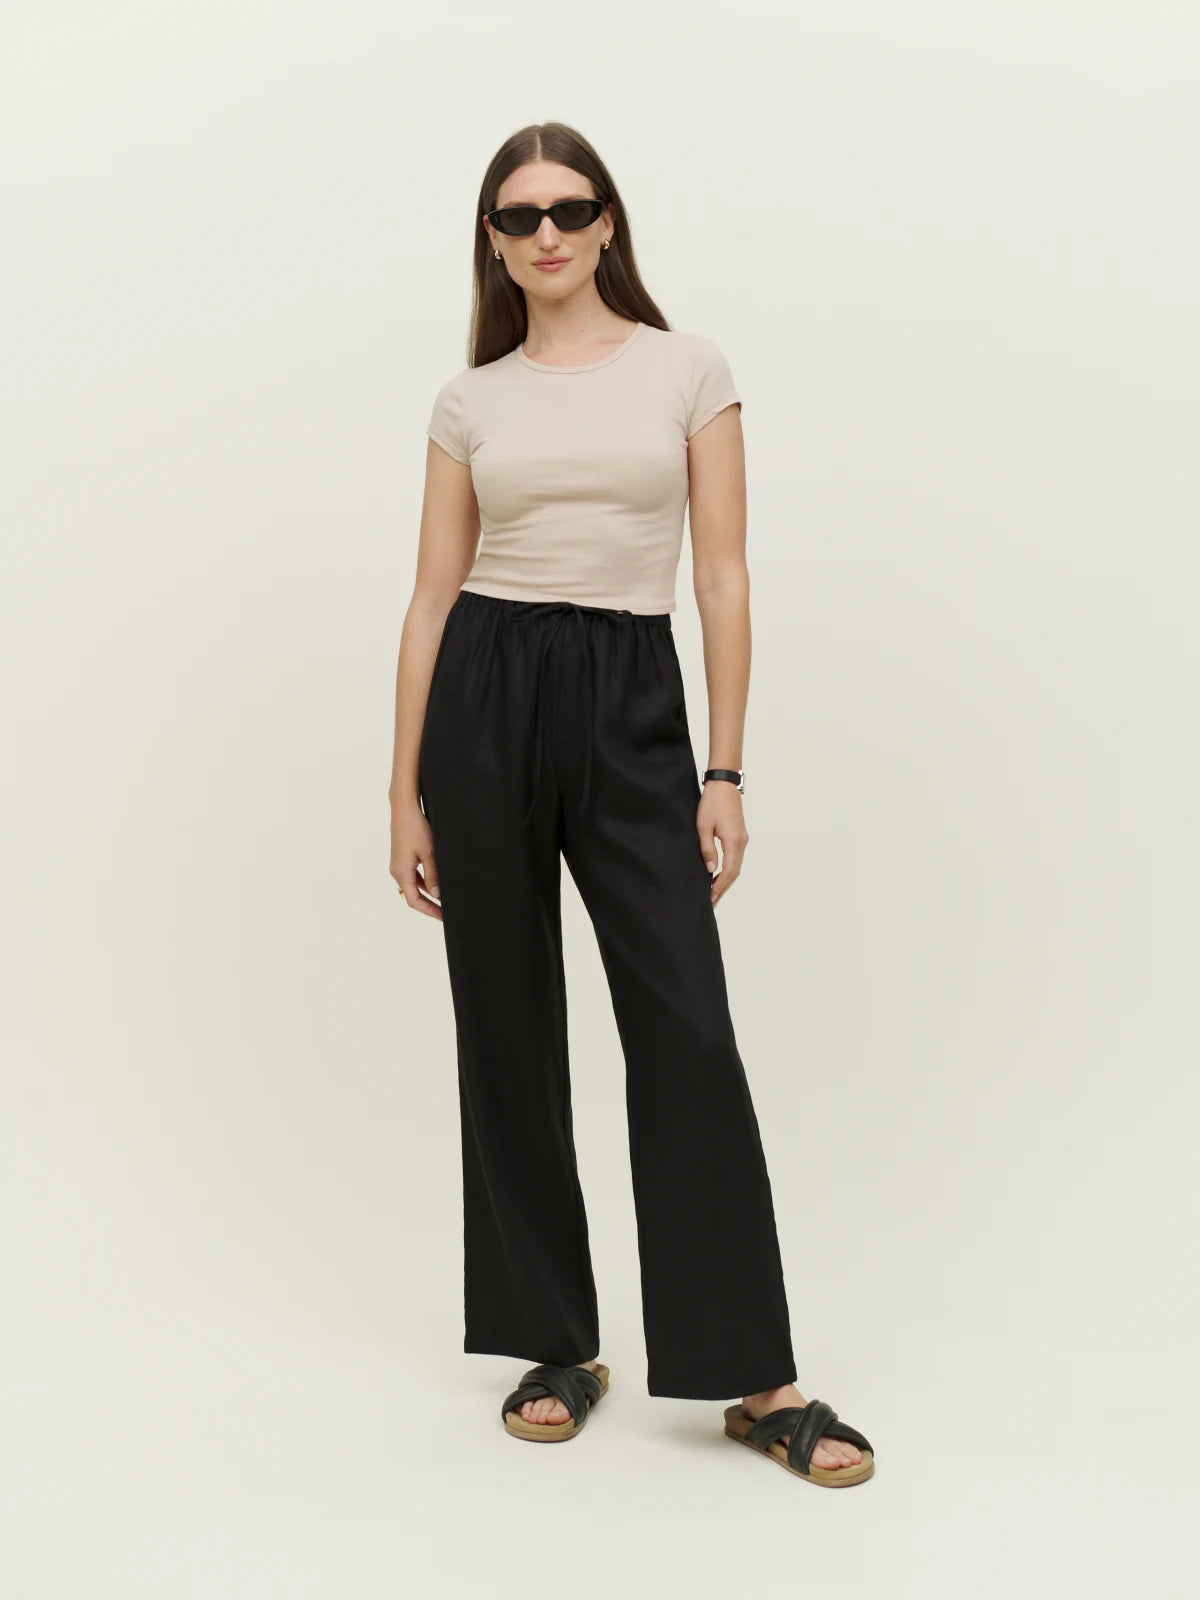 18 Petite Linen Pants You Won't Have to Tailor - Starting at $25